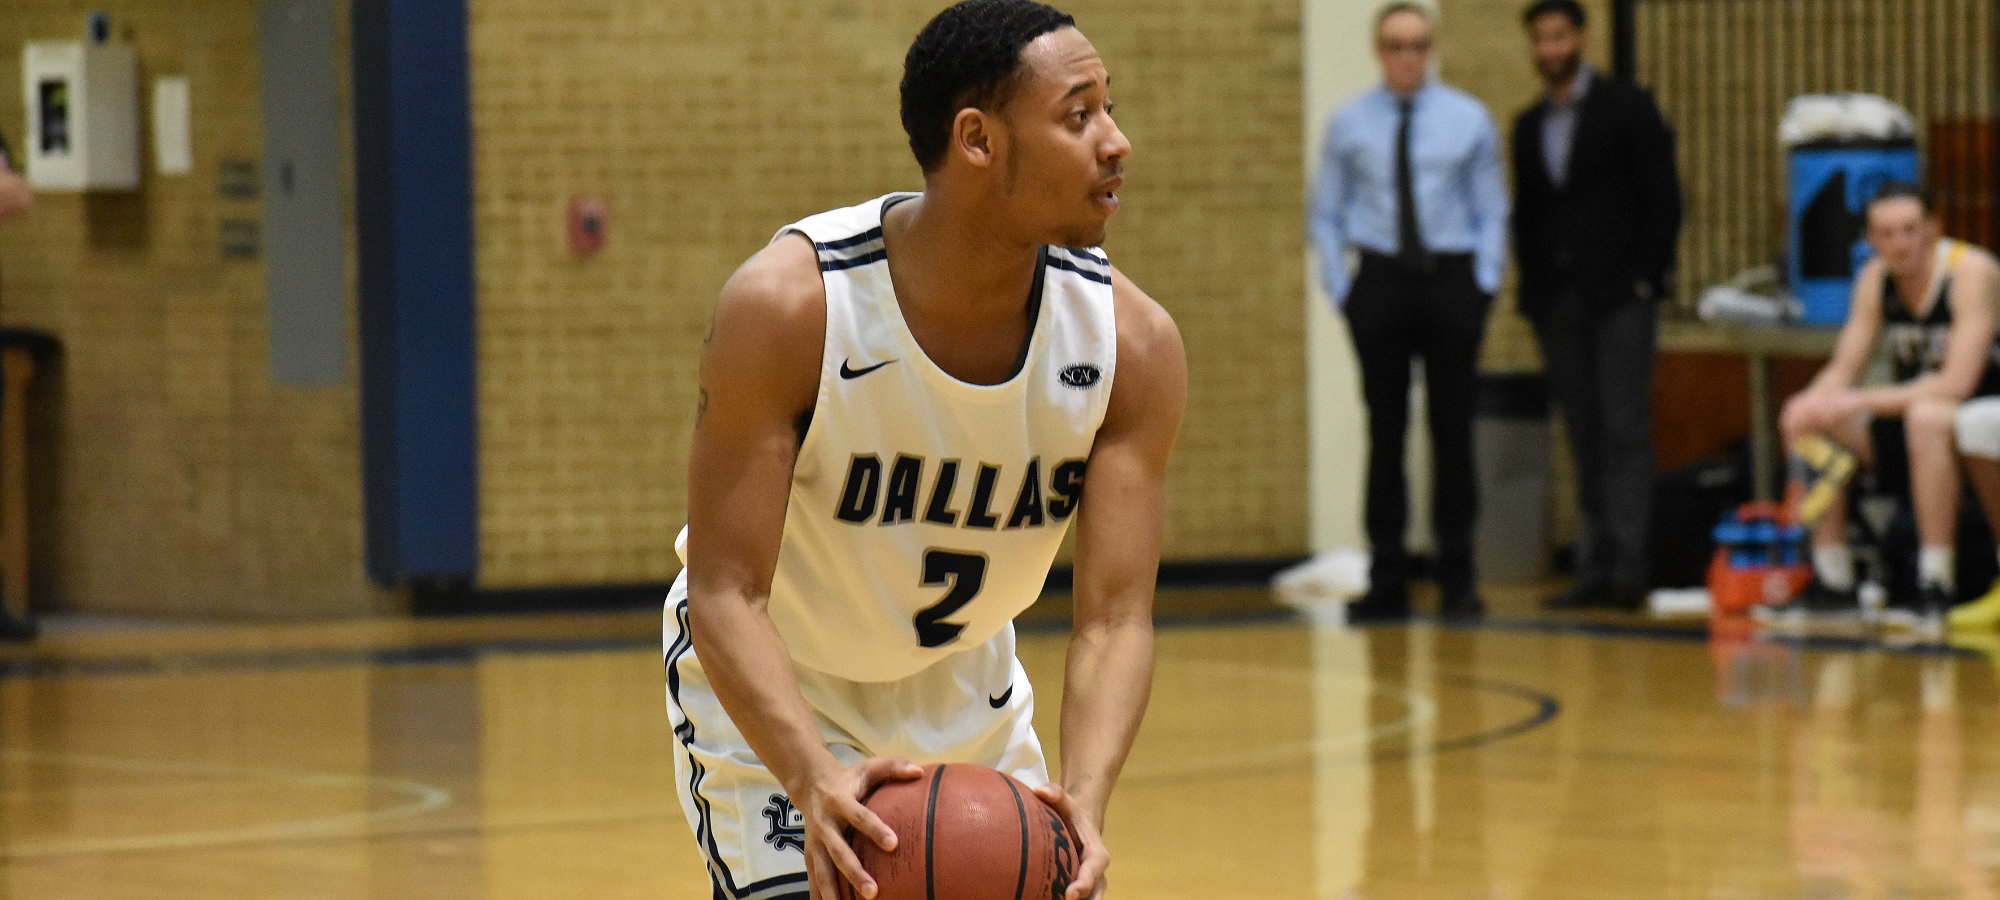 Crusaders Conclude Regular Season at Trinity with a 68-55 Setback